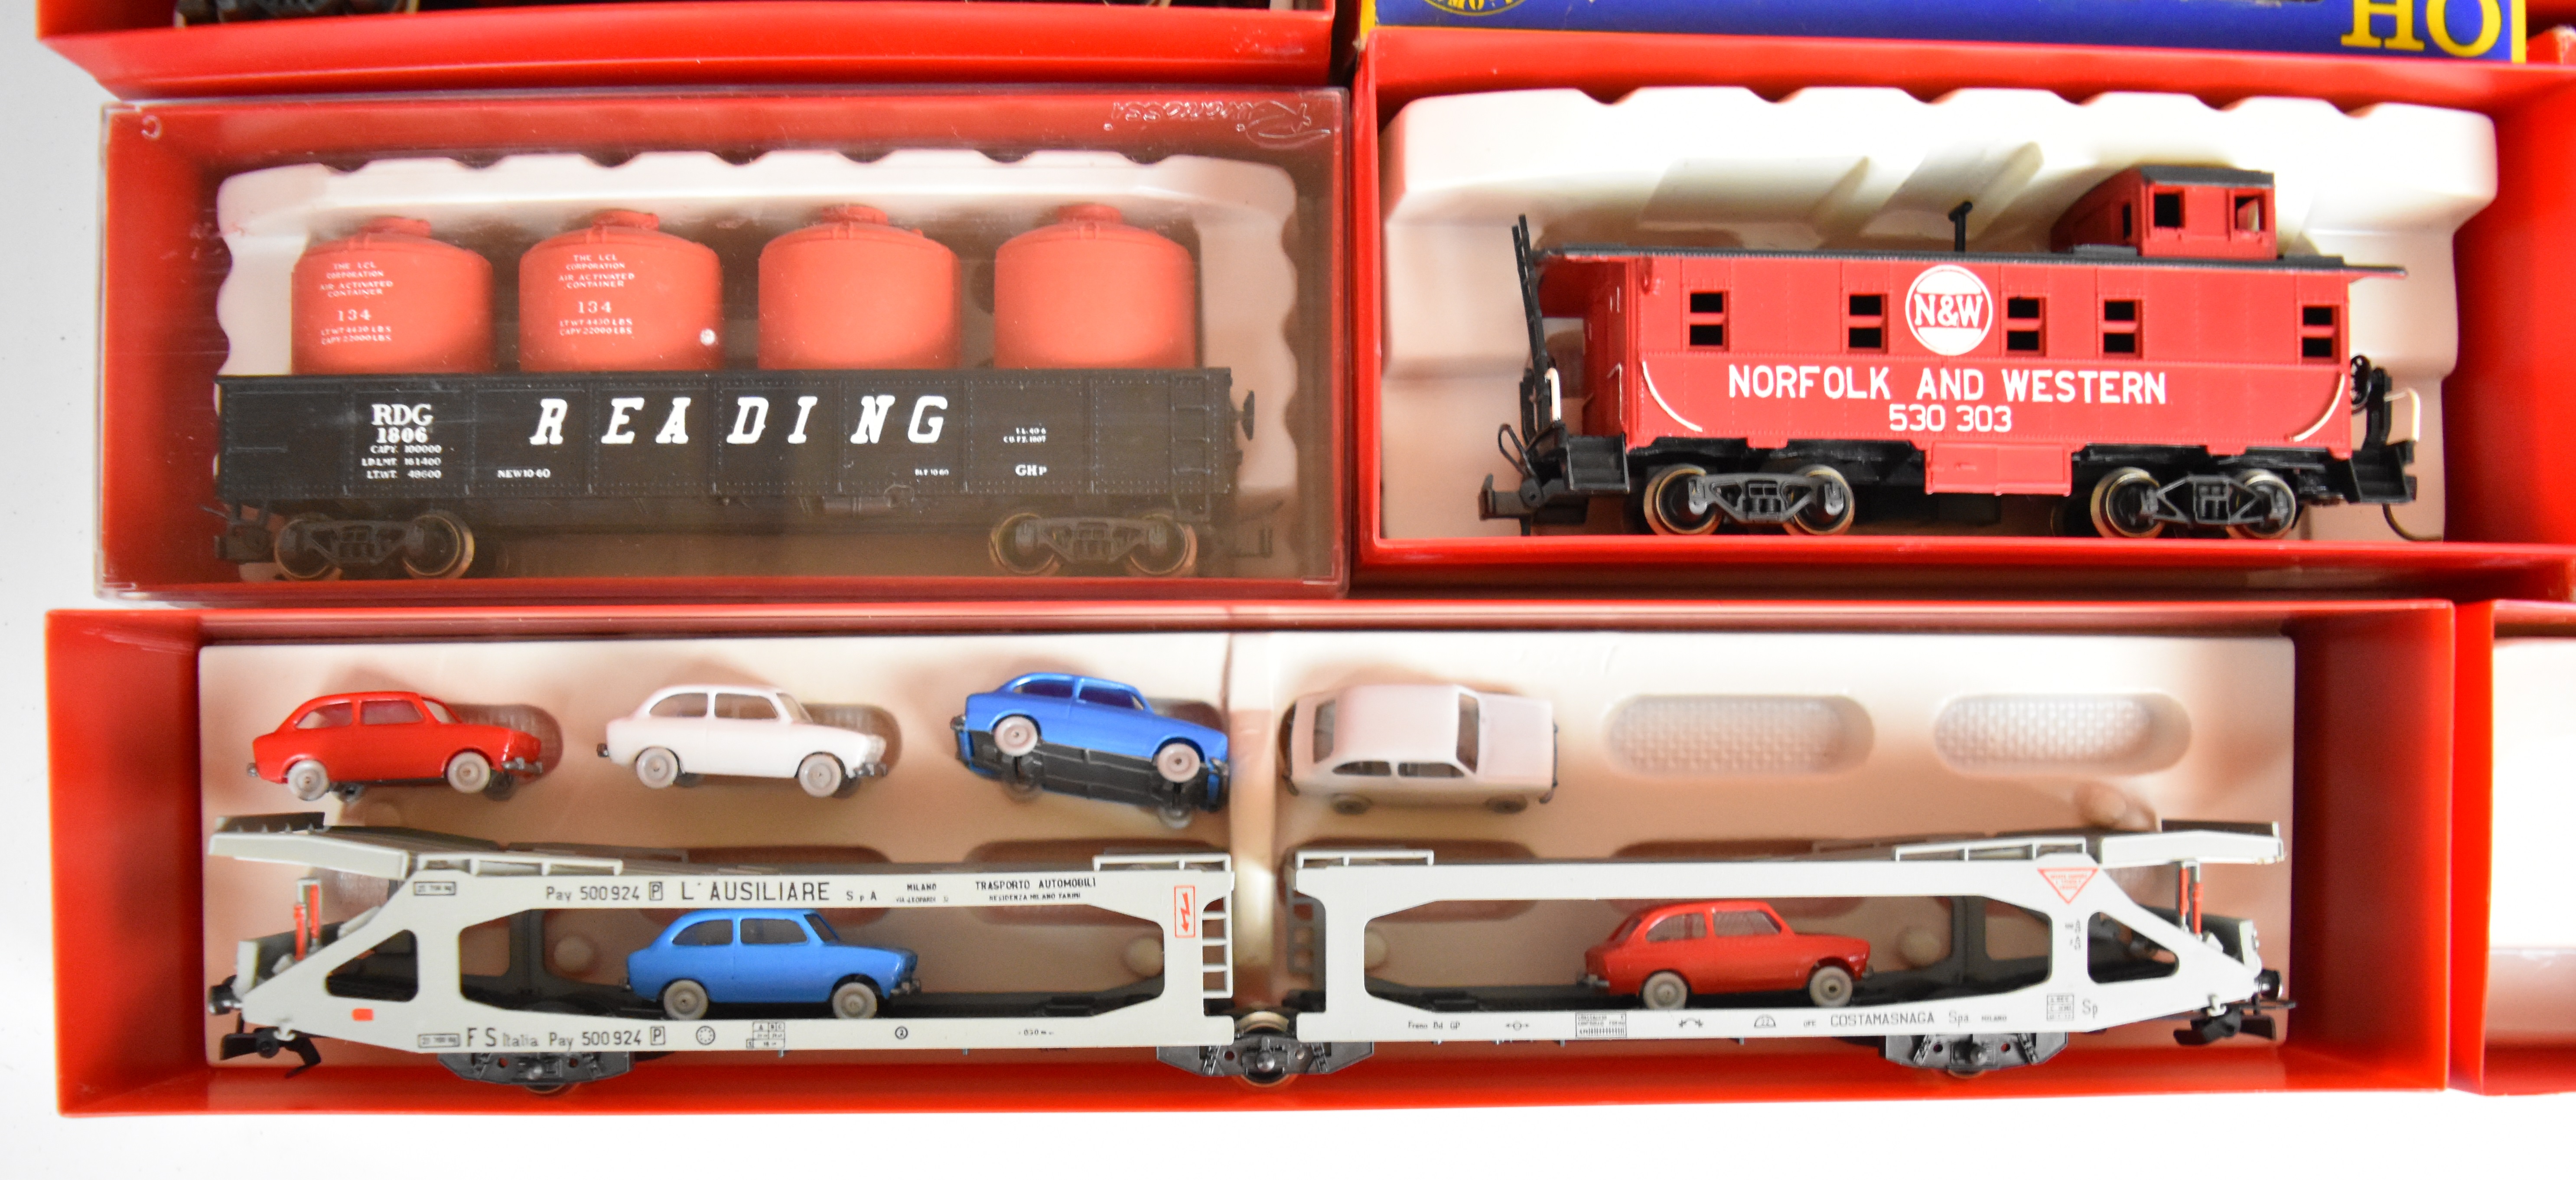 Thirteen Rivarossi H0 gauge American box cars and wagons to include Norfolk & Western, Soo Line, - Image 2 of 4